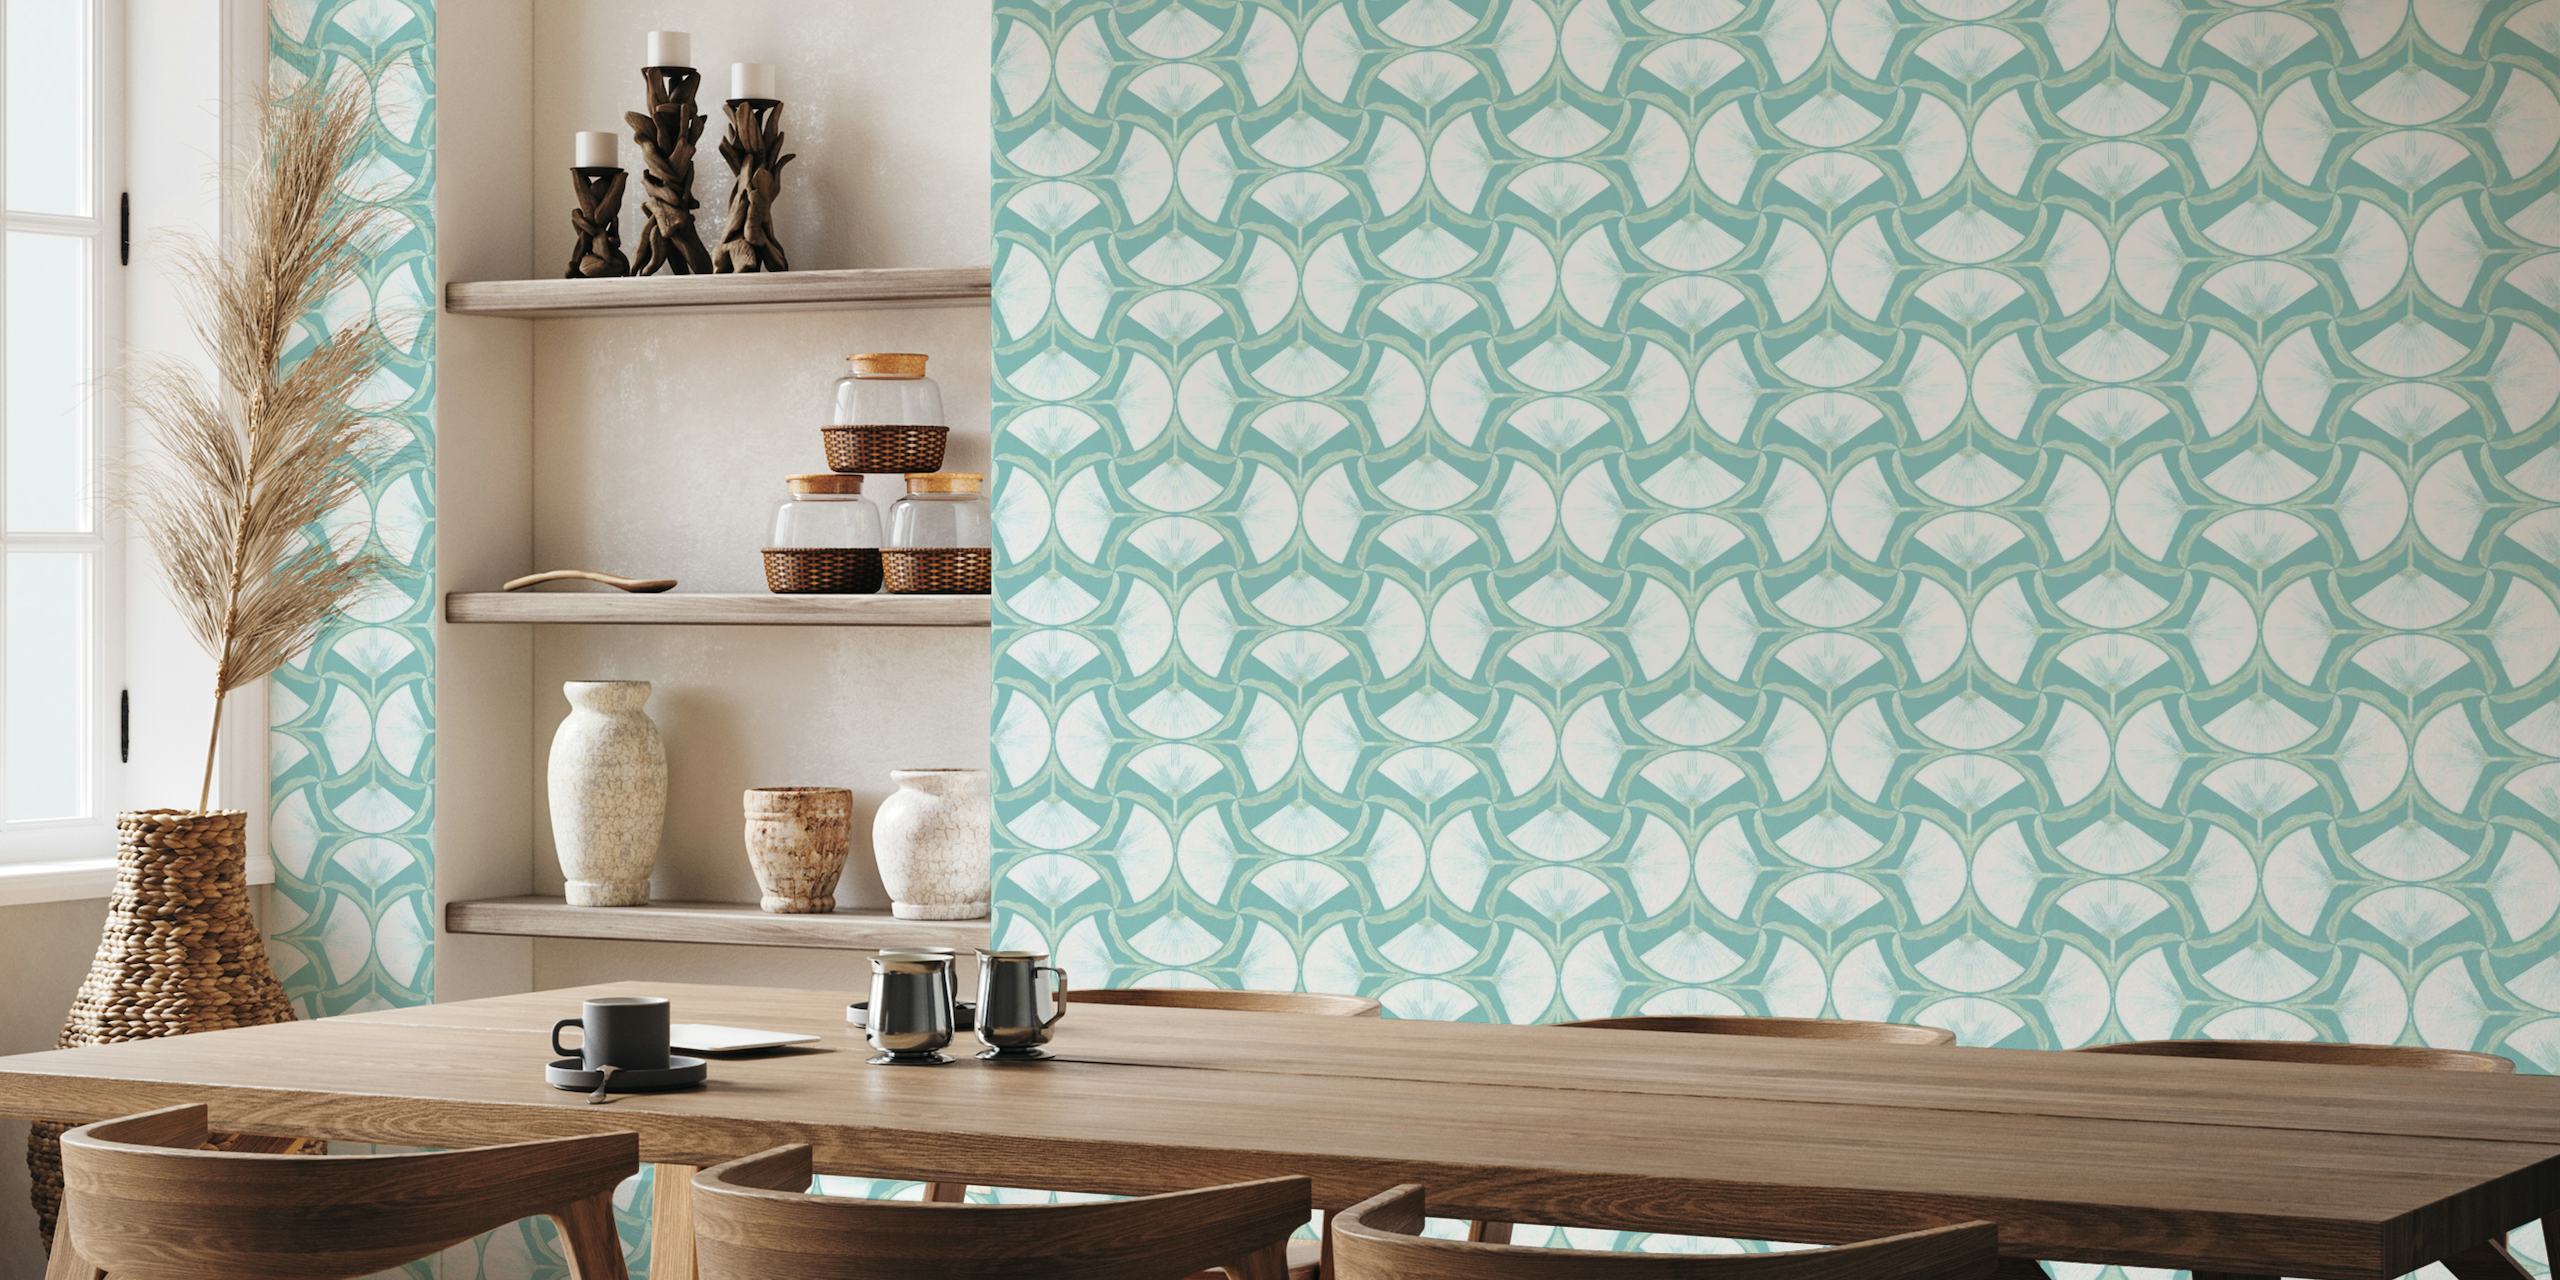 Teal floral wall mural with tranquil symmetry for interior decor